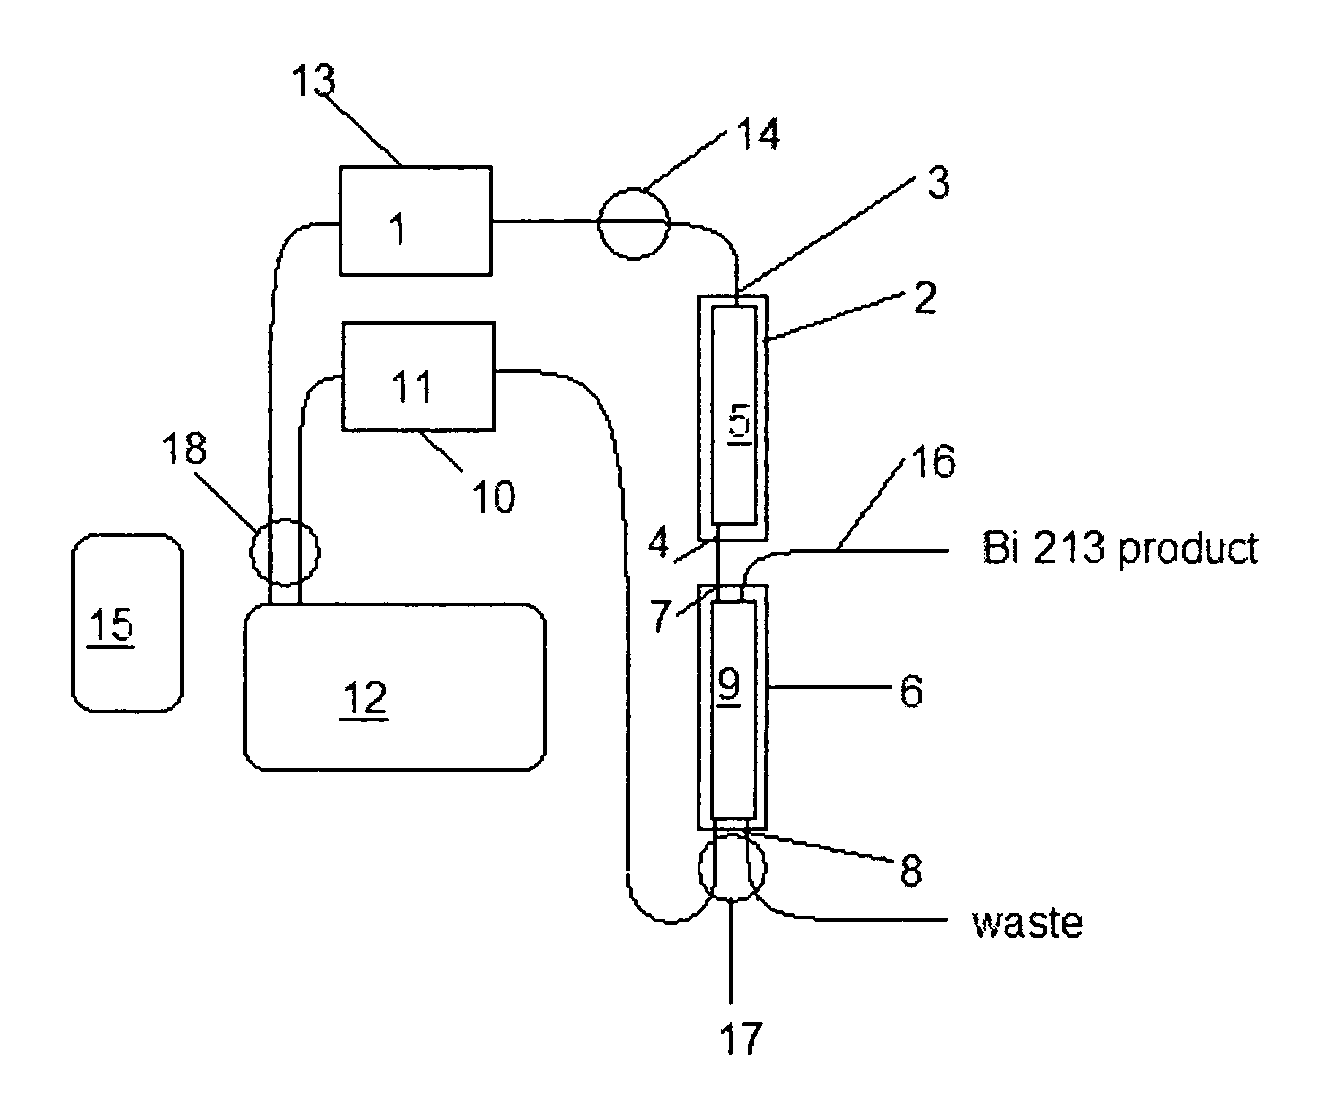 Method and apparatus for production of 213Bi from a high activity 225Ac source